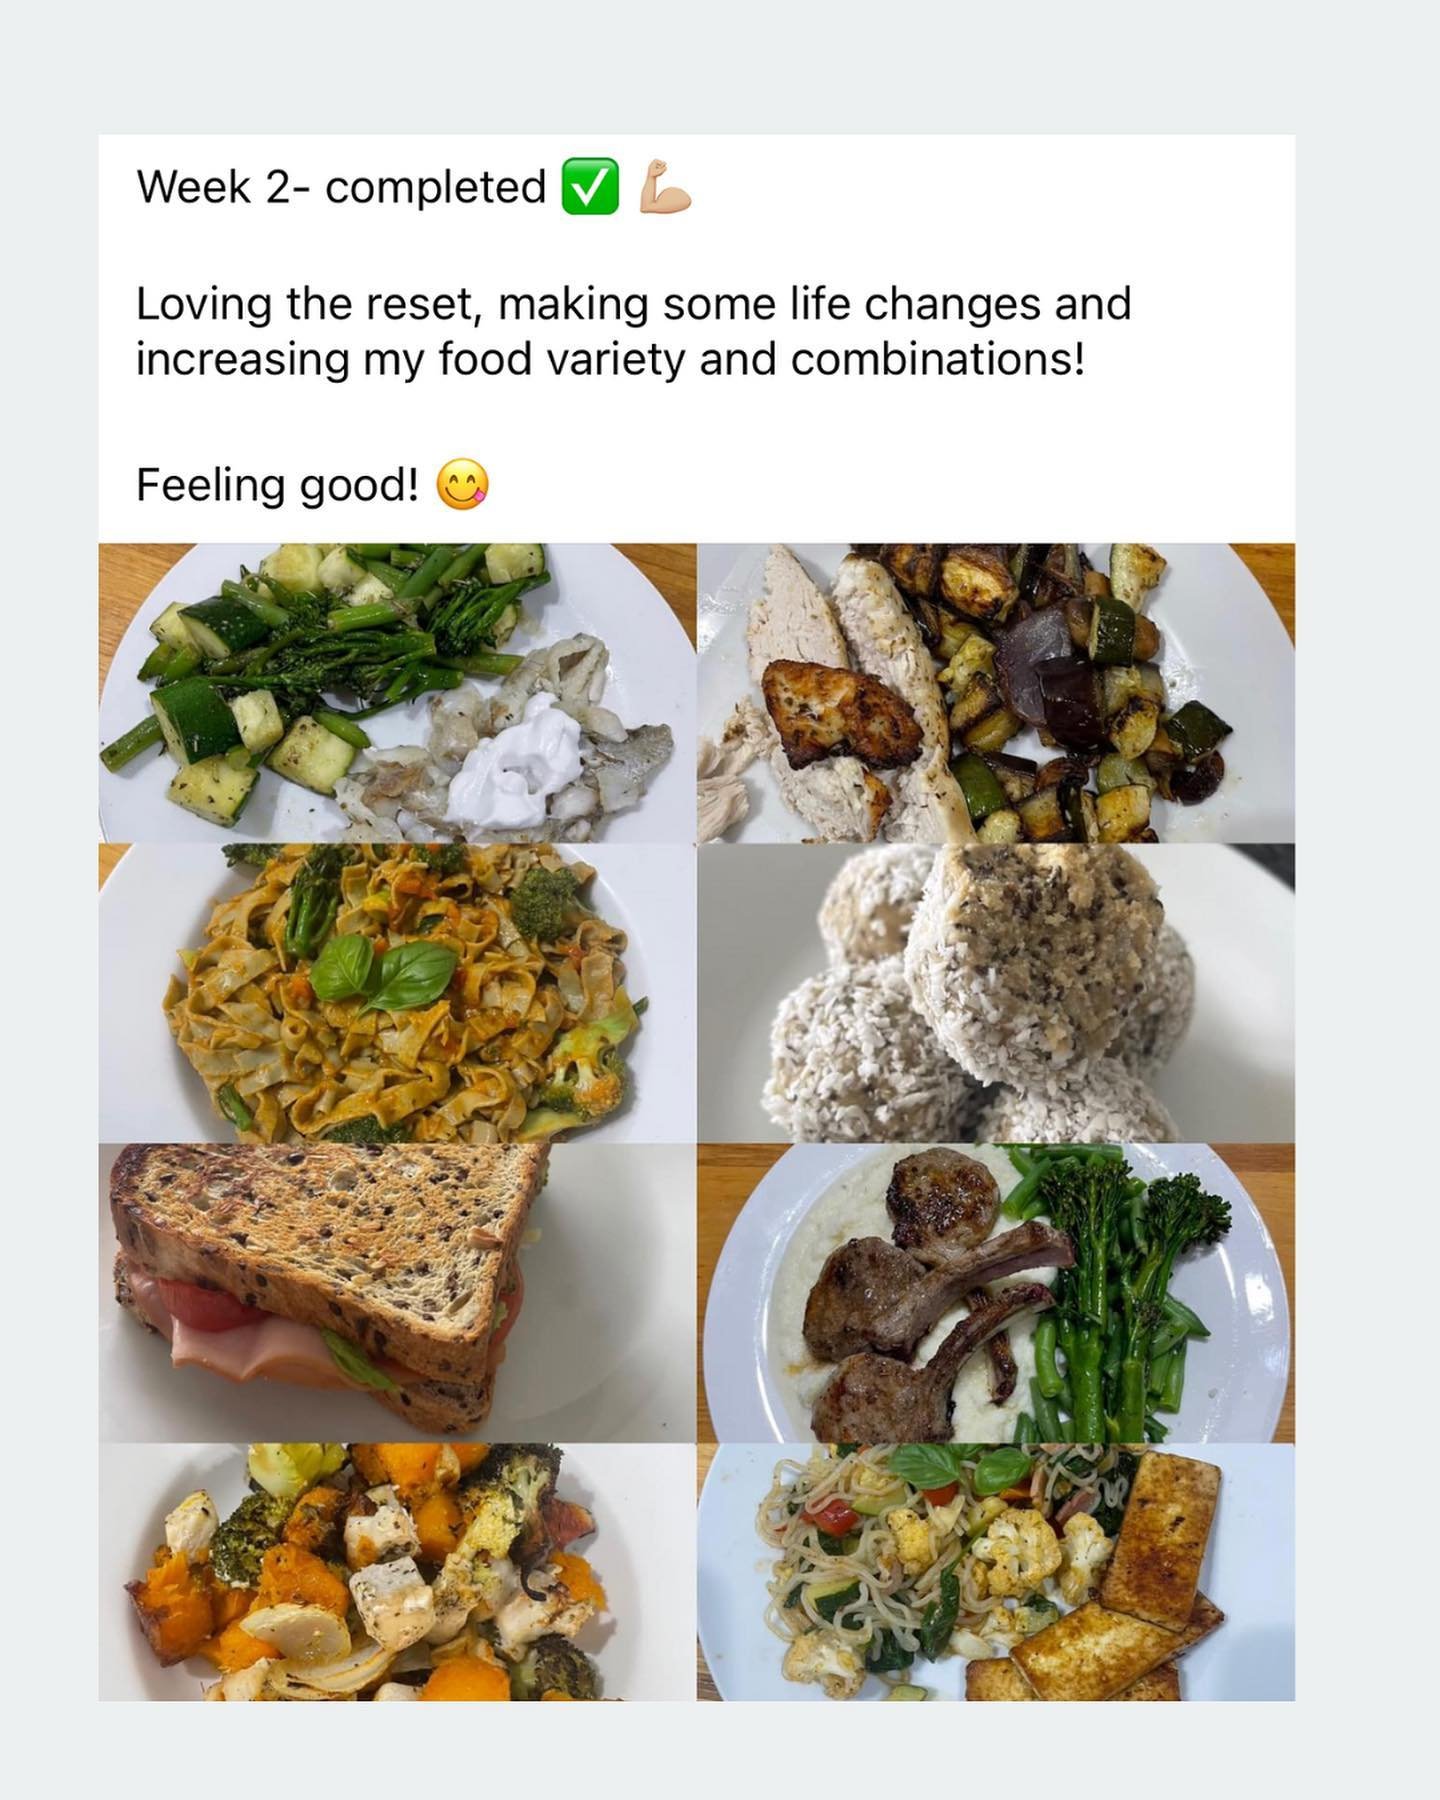 🤩😱😱 Come take a sneak peak of what&rsquo;s gone on in the Facebook groups in the last week&hellip;

Women sharing insane wins, yummy food and changing their lives after trying it all.

Love seeing you guys win 🥰 and I&rsquo;m hungryyy looking at 